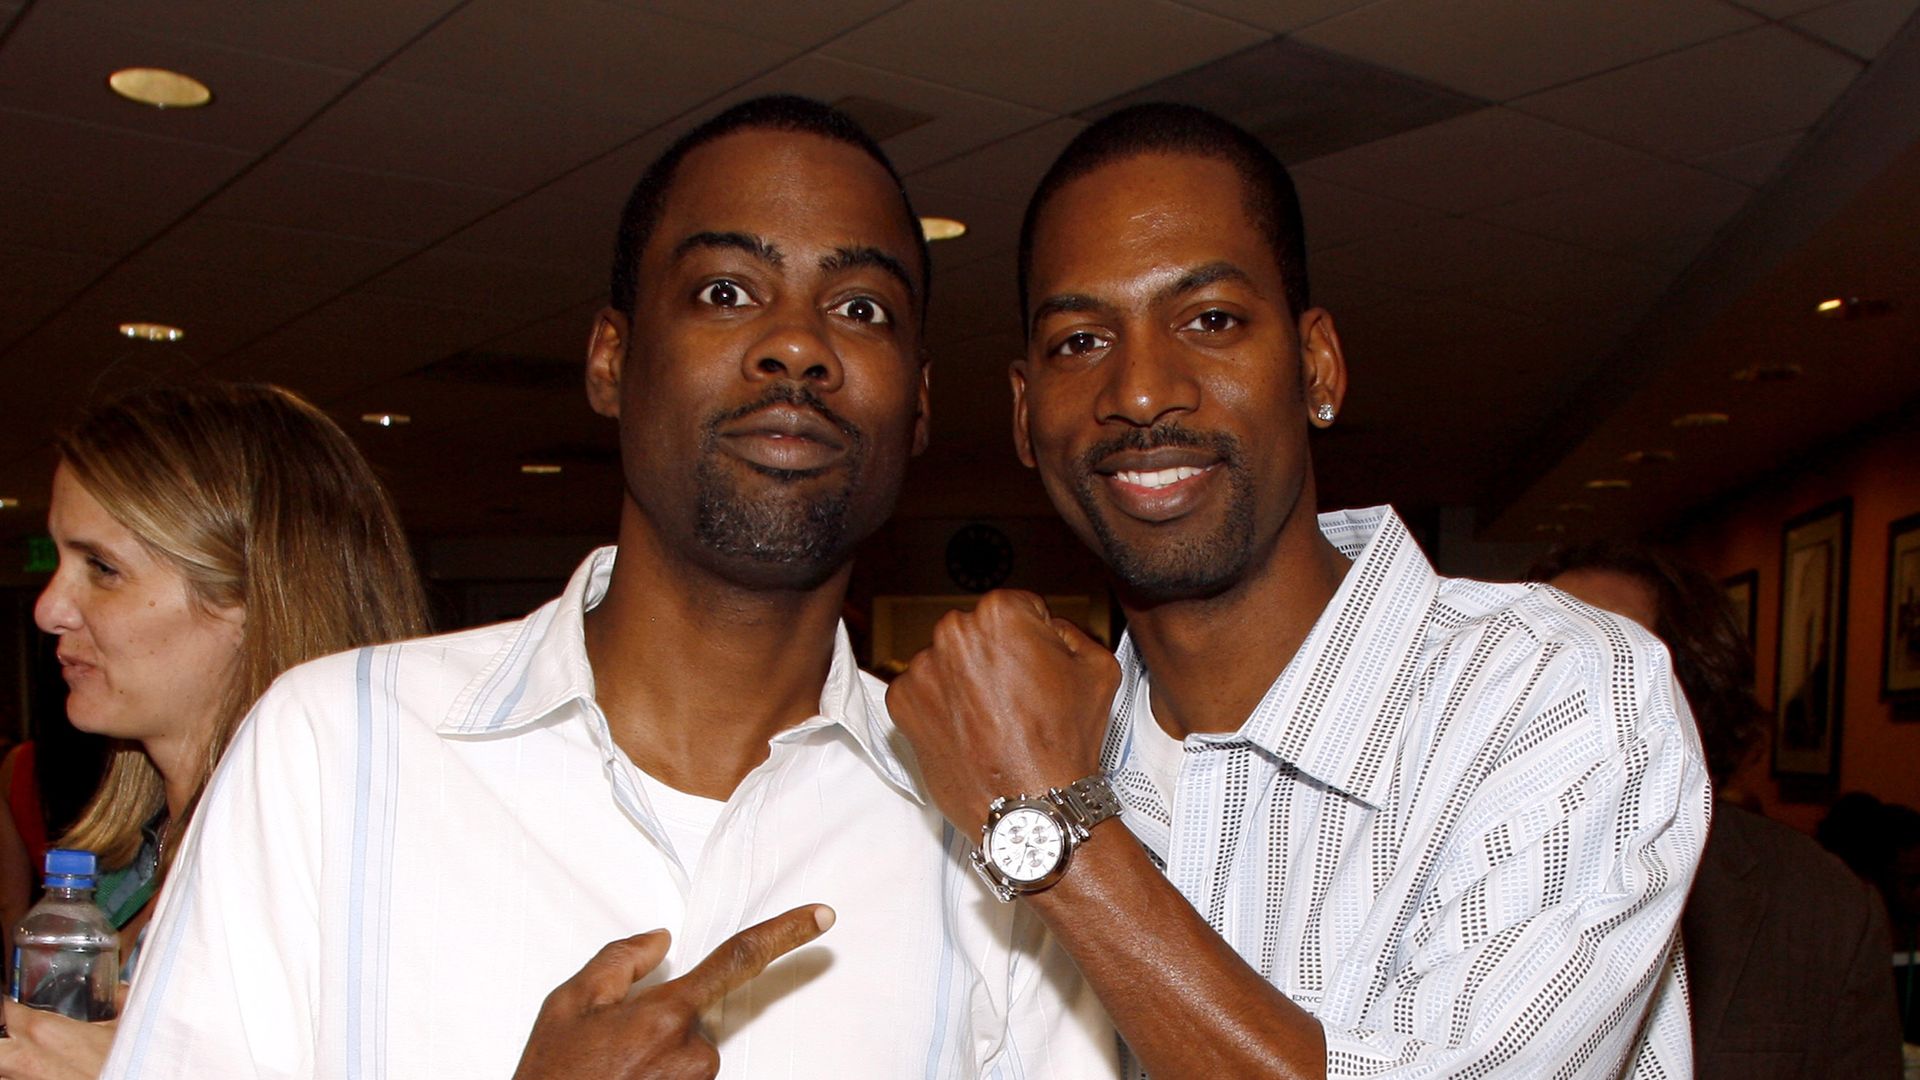 Chris Rock and Tony Rock during CW Launch Party